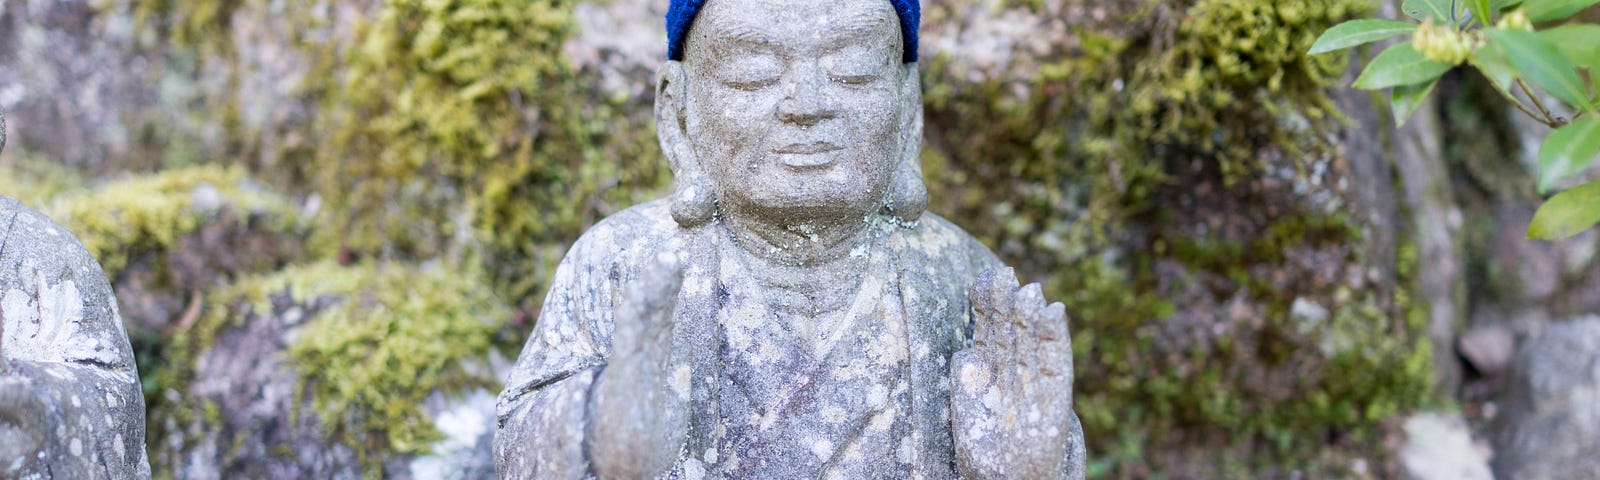 Stay Calm and Grounded Buddha